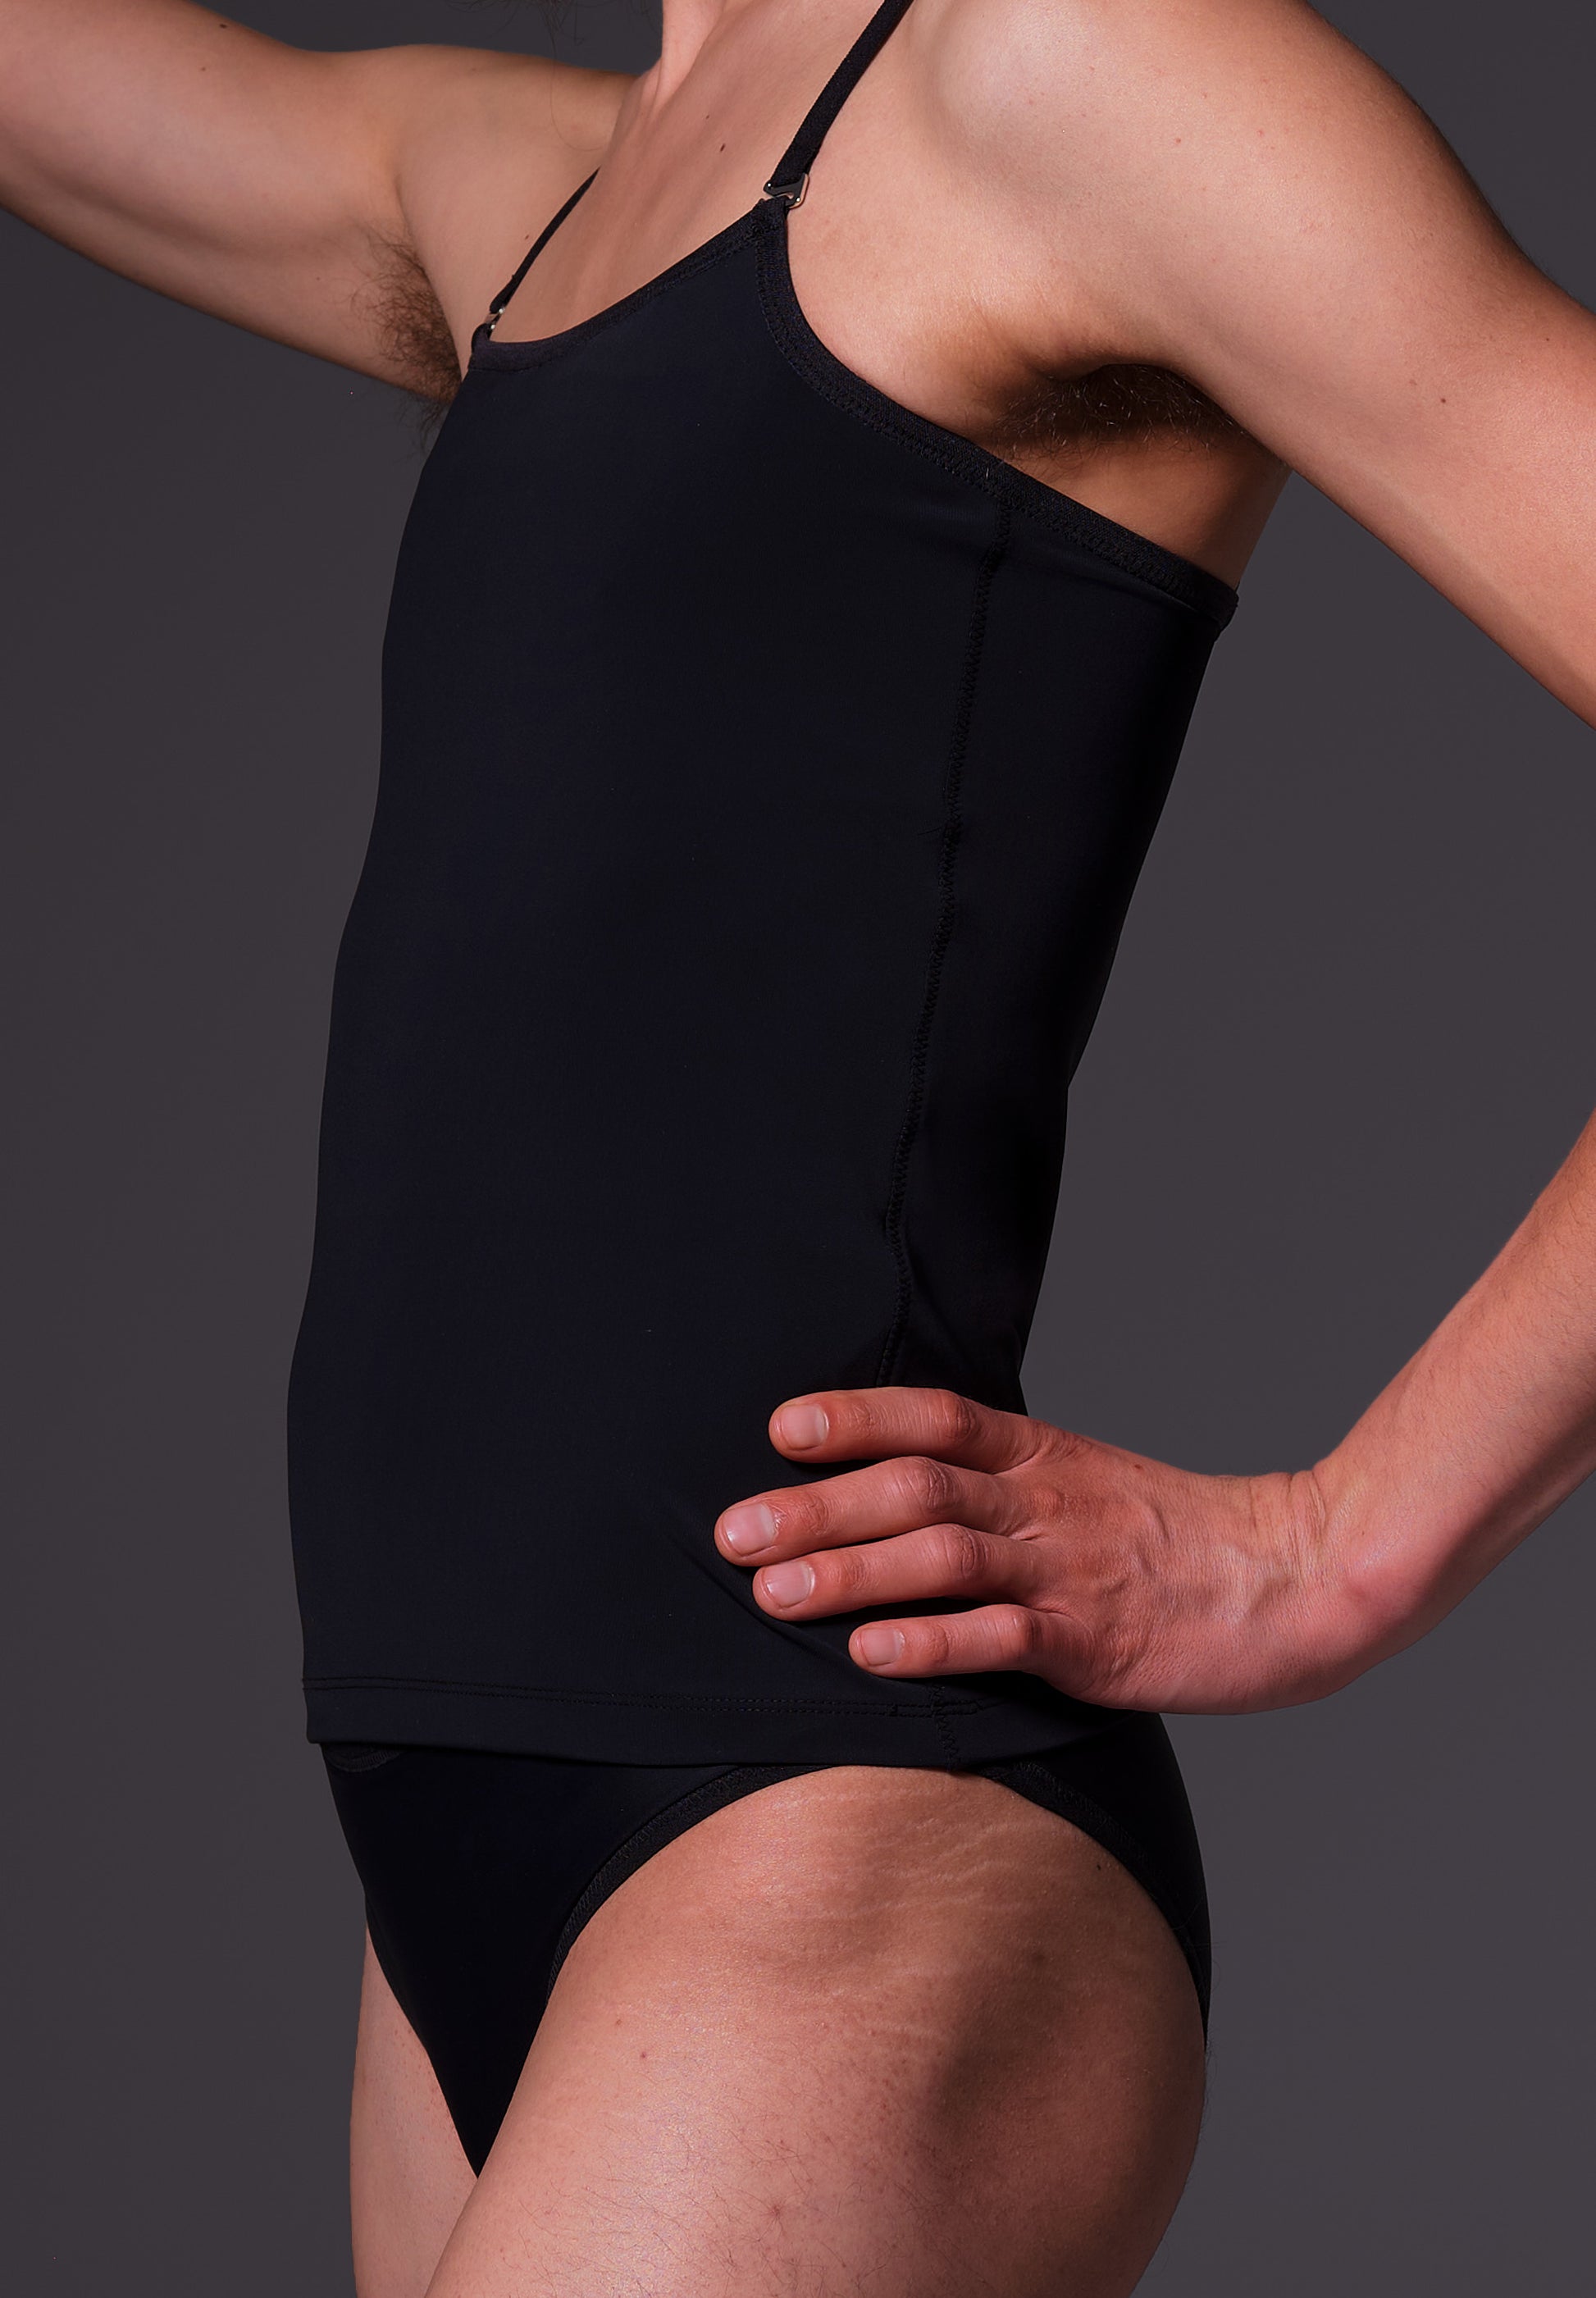 Made in China silicone bodysuits is the latest solution to give